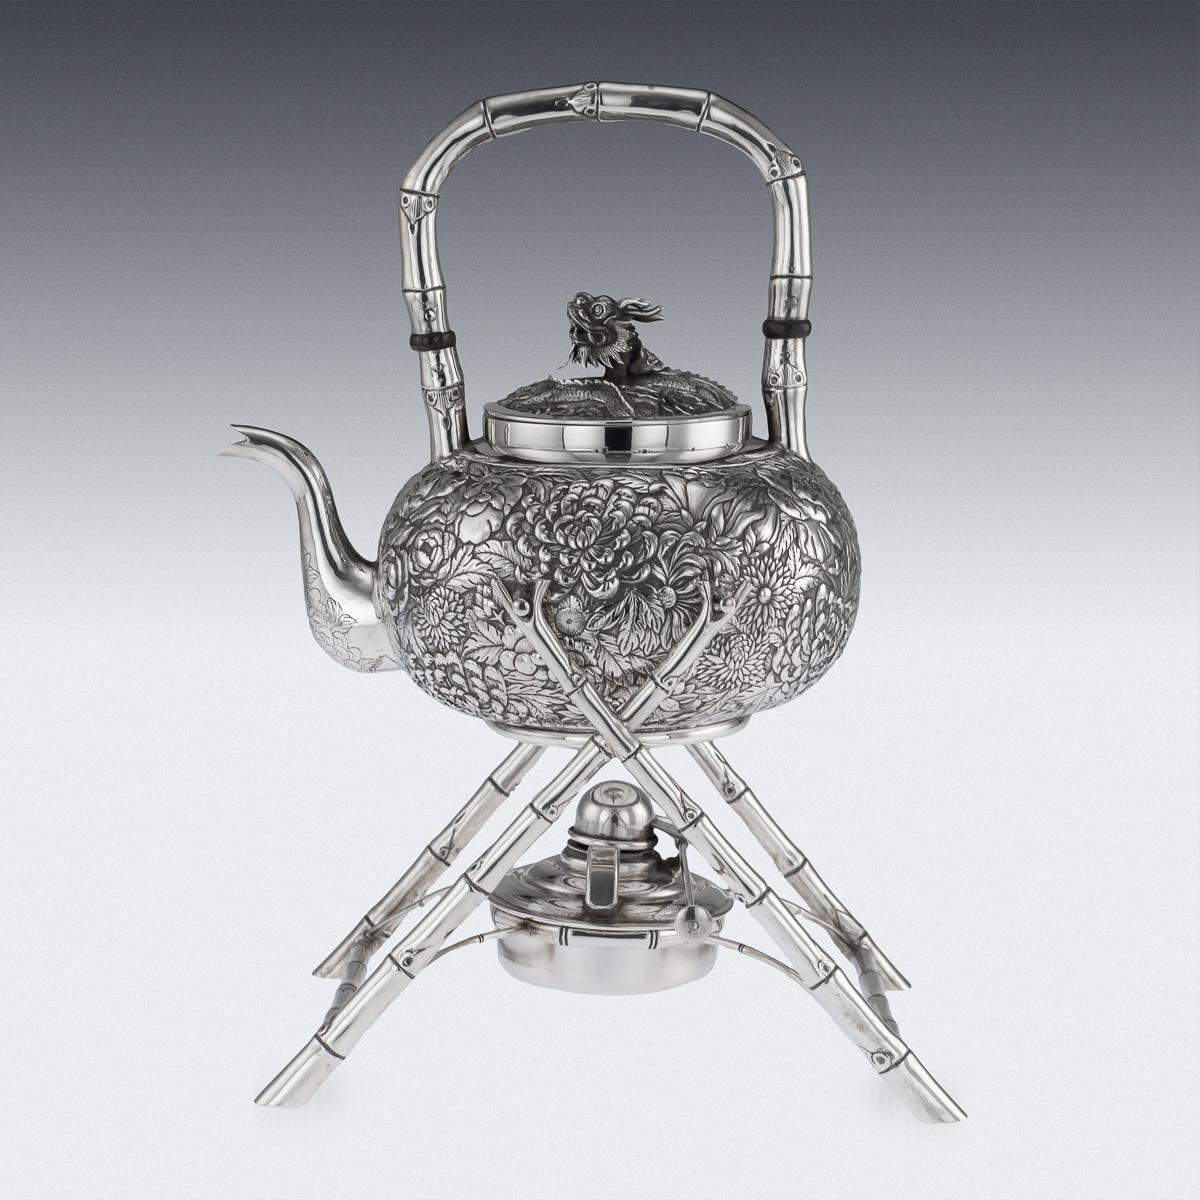 Antique late 19th century Chinese export solid silver tea kettle on stand, the body chased in relief with floral decoration, the domed lids mounted with a dragons head and chased in a complimentary style. The kettle is suspended on a stylized, well